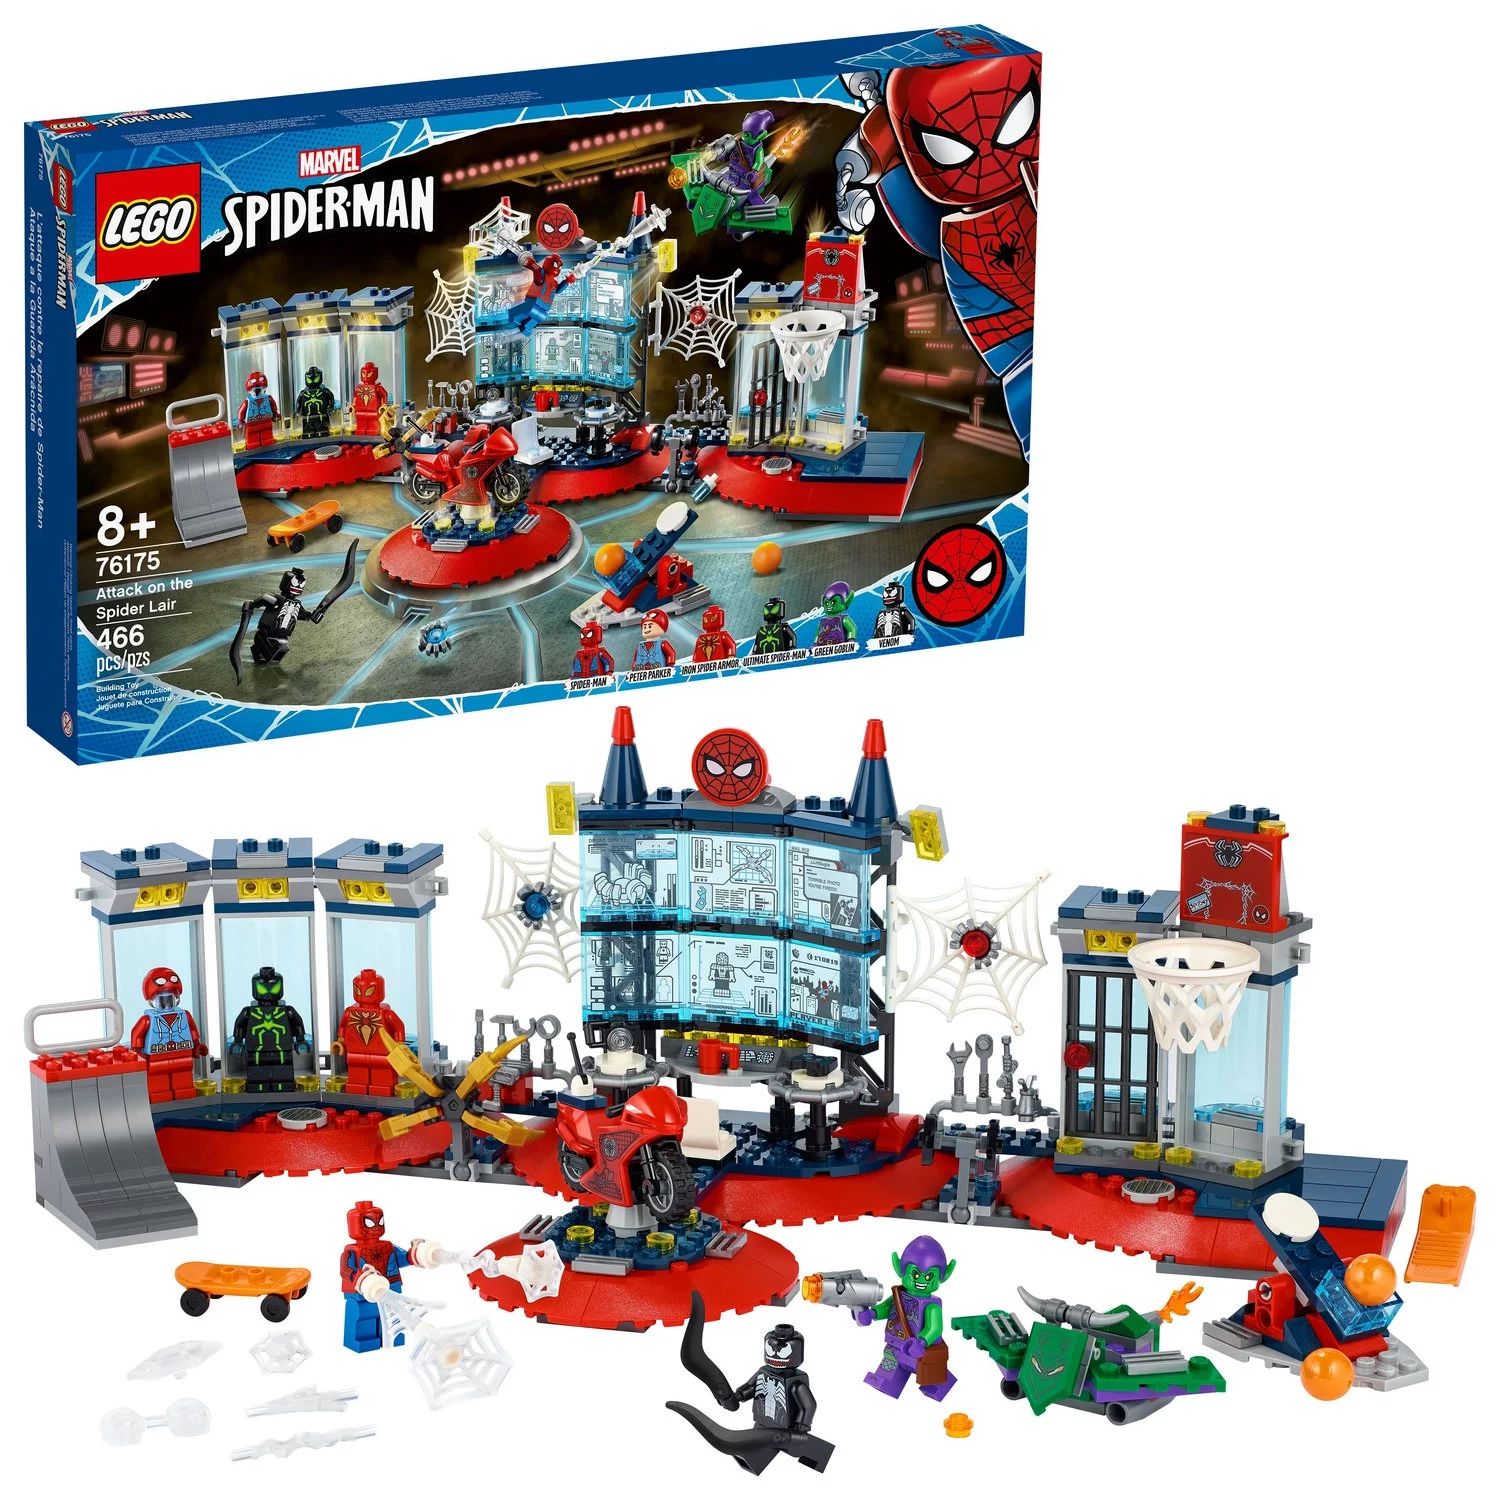 LEGO Marvel Spider-Man Attack on the Spider Lair 76175 Collectible Building Toy (466 Pieces) - Wa... | Walmart (US)